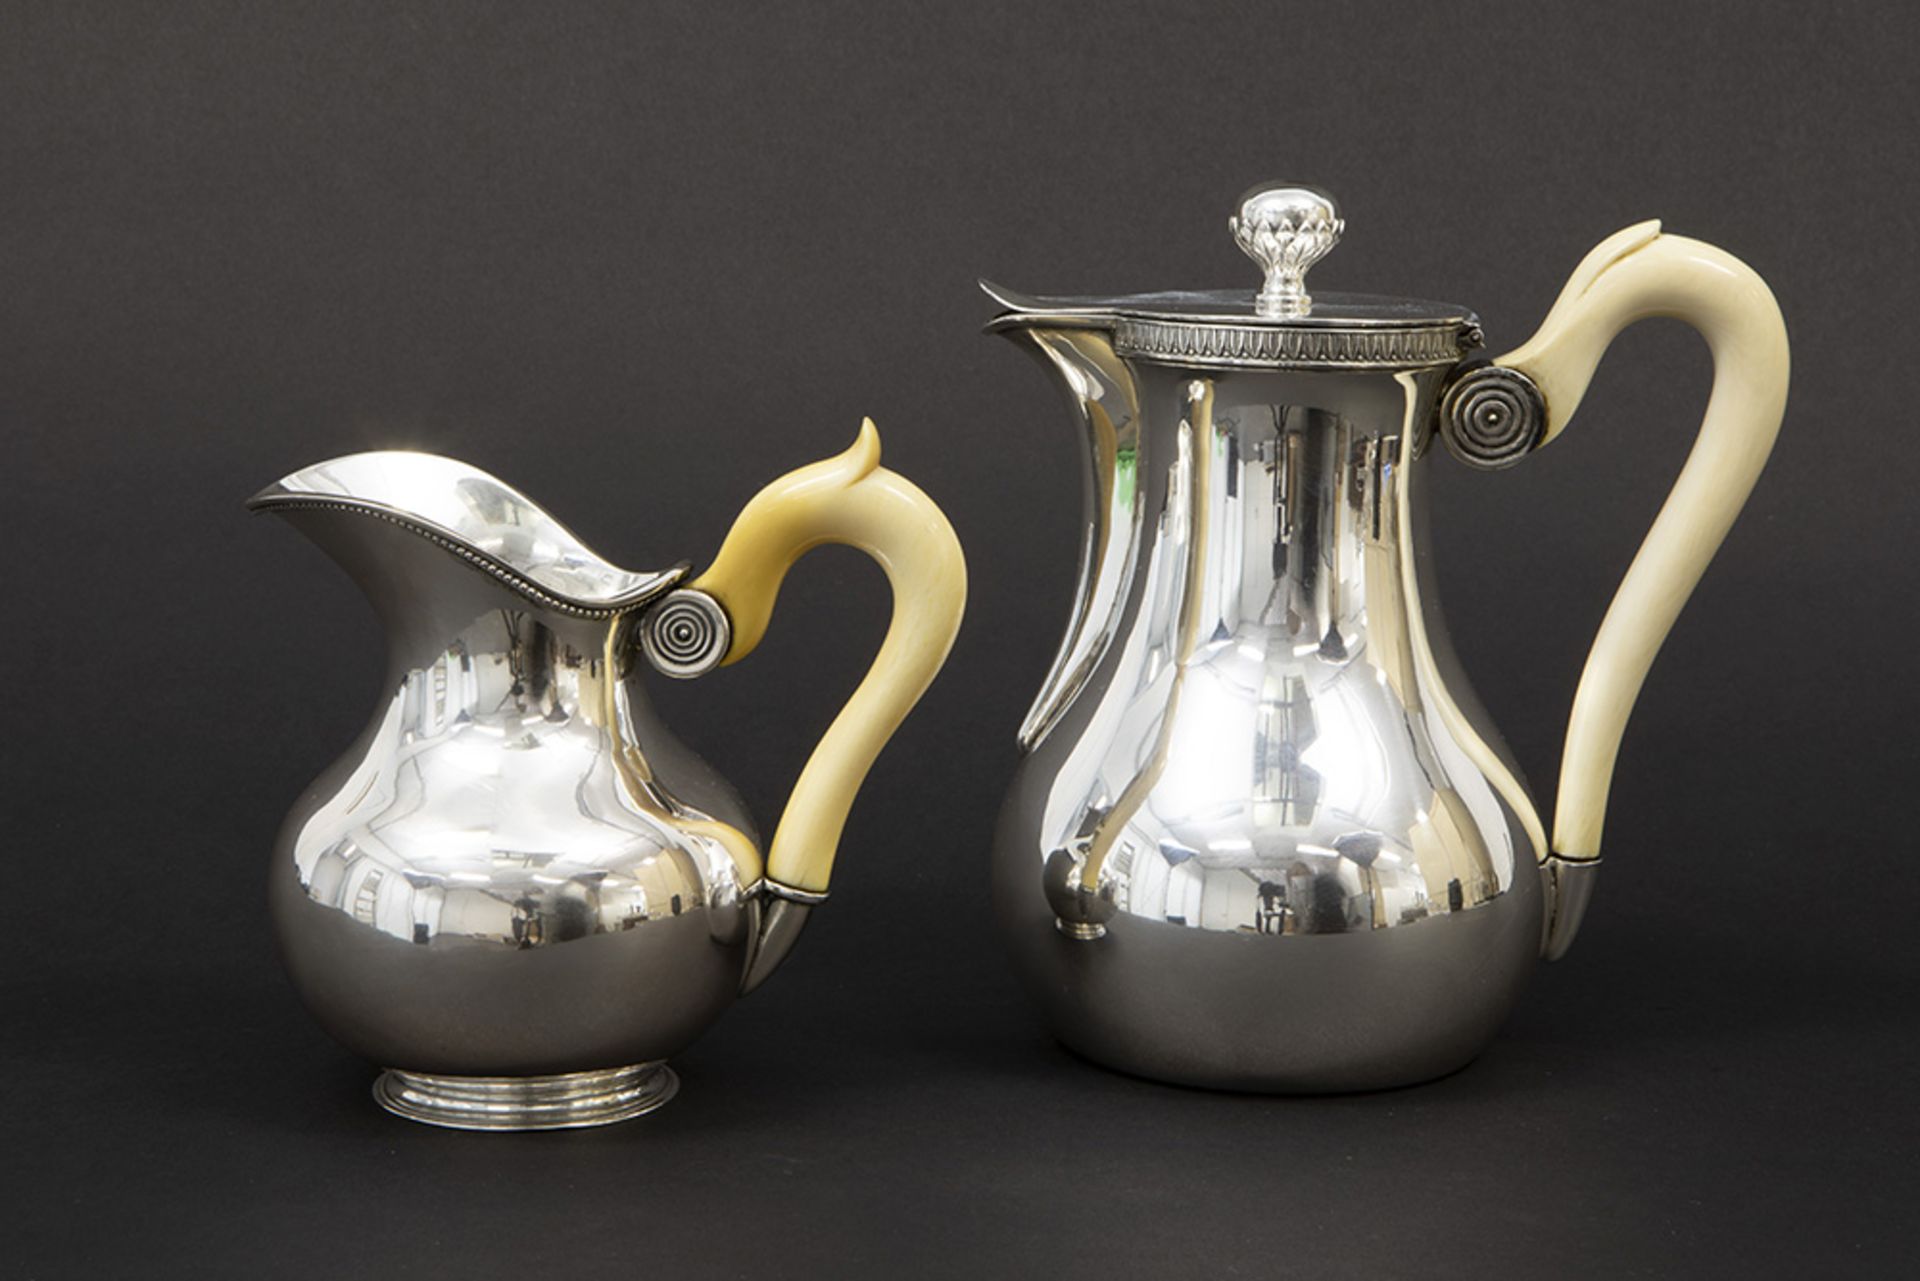 antique set of coffee pot and milk jug (each with ivory grip), the coffee pot is in marked and A.